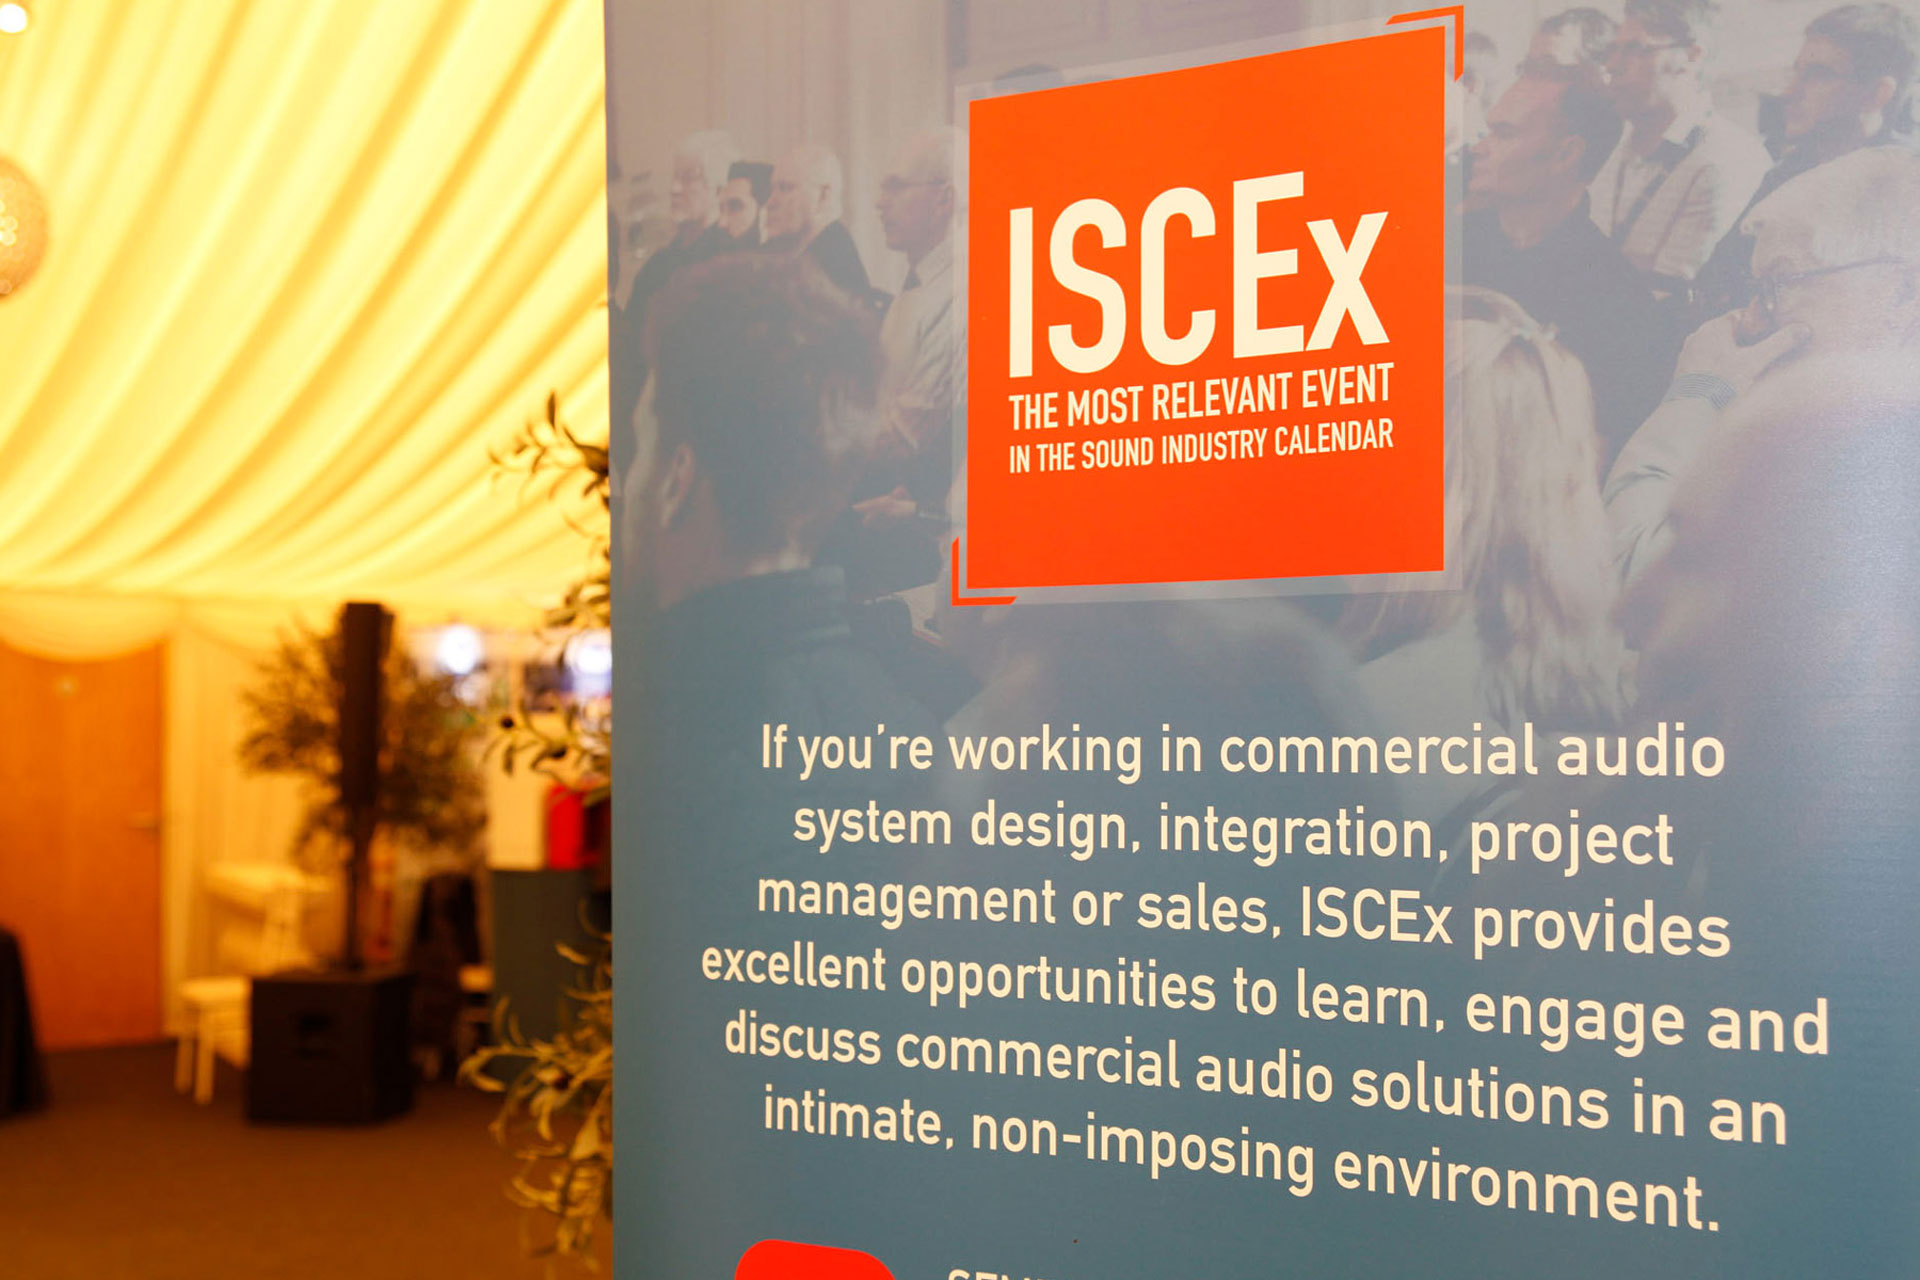 New exhibitors confirmed for ISCEx 2019